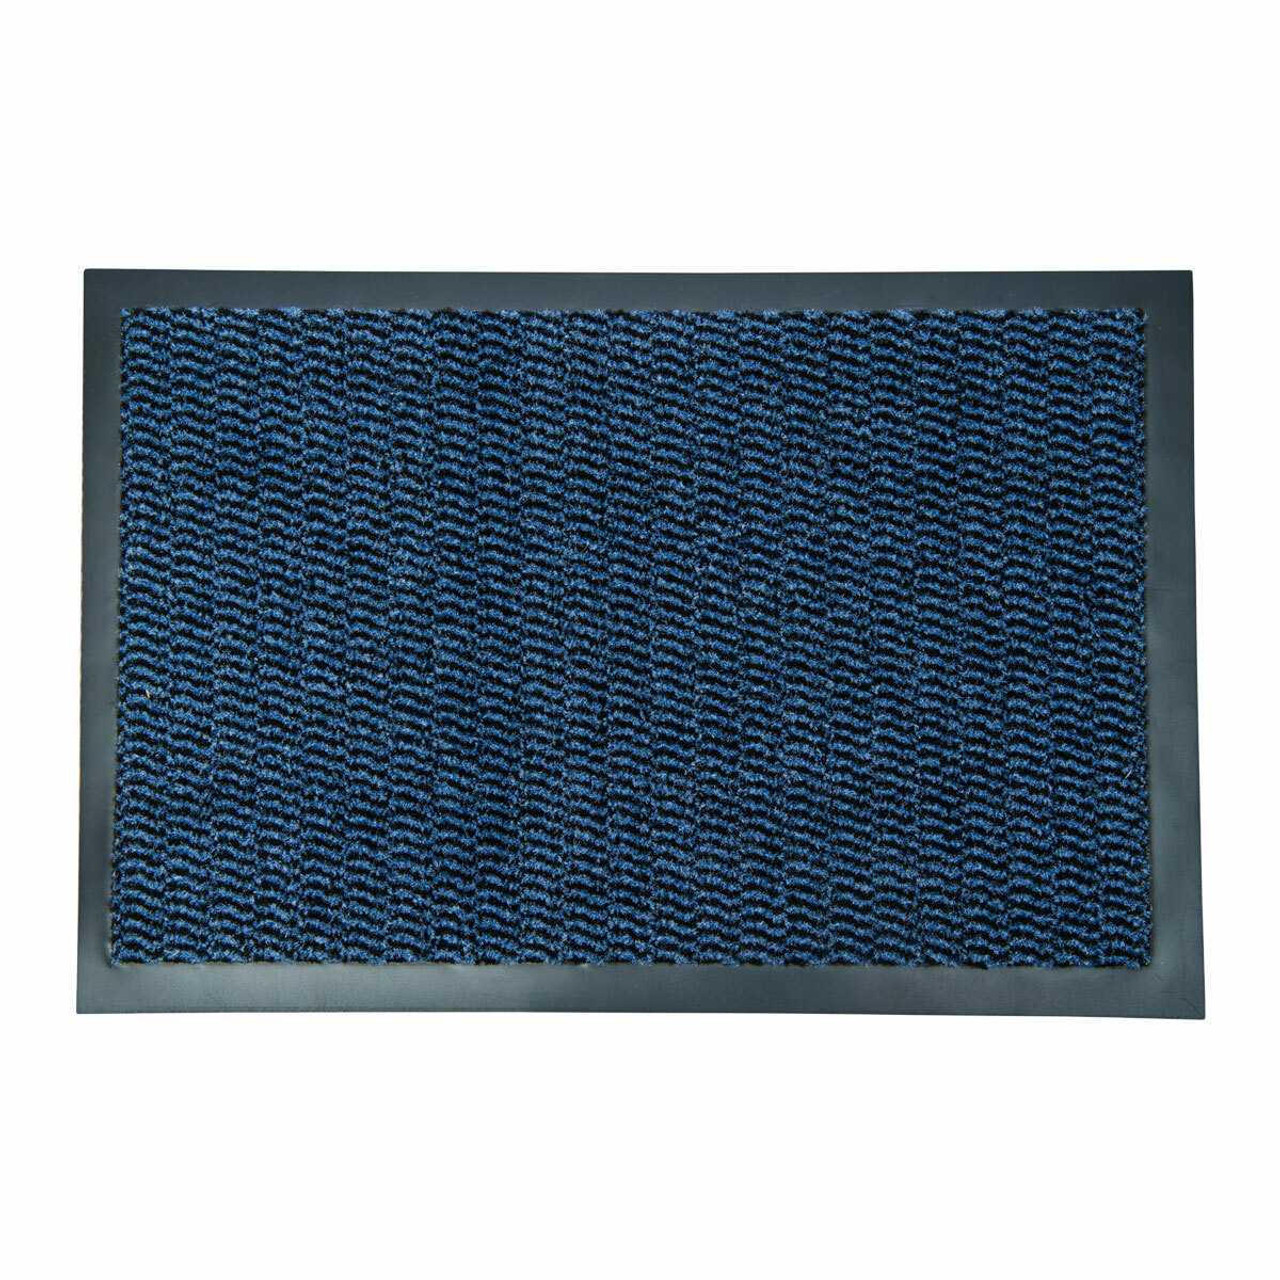 Ecomills Rubber Doormat, Large, 36 x 48, Blue, Large, Absorbent Indoor  Outdoor Rug, Stain Resistant, Rubber Non Slip Backing, Heavy Duty, Durable